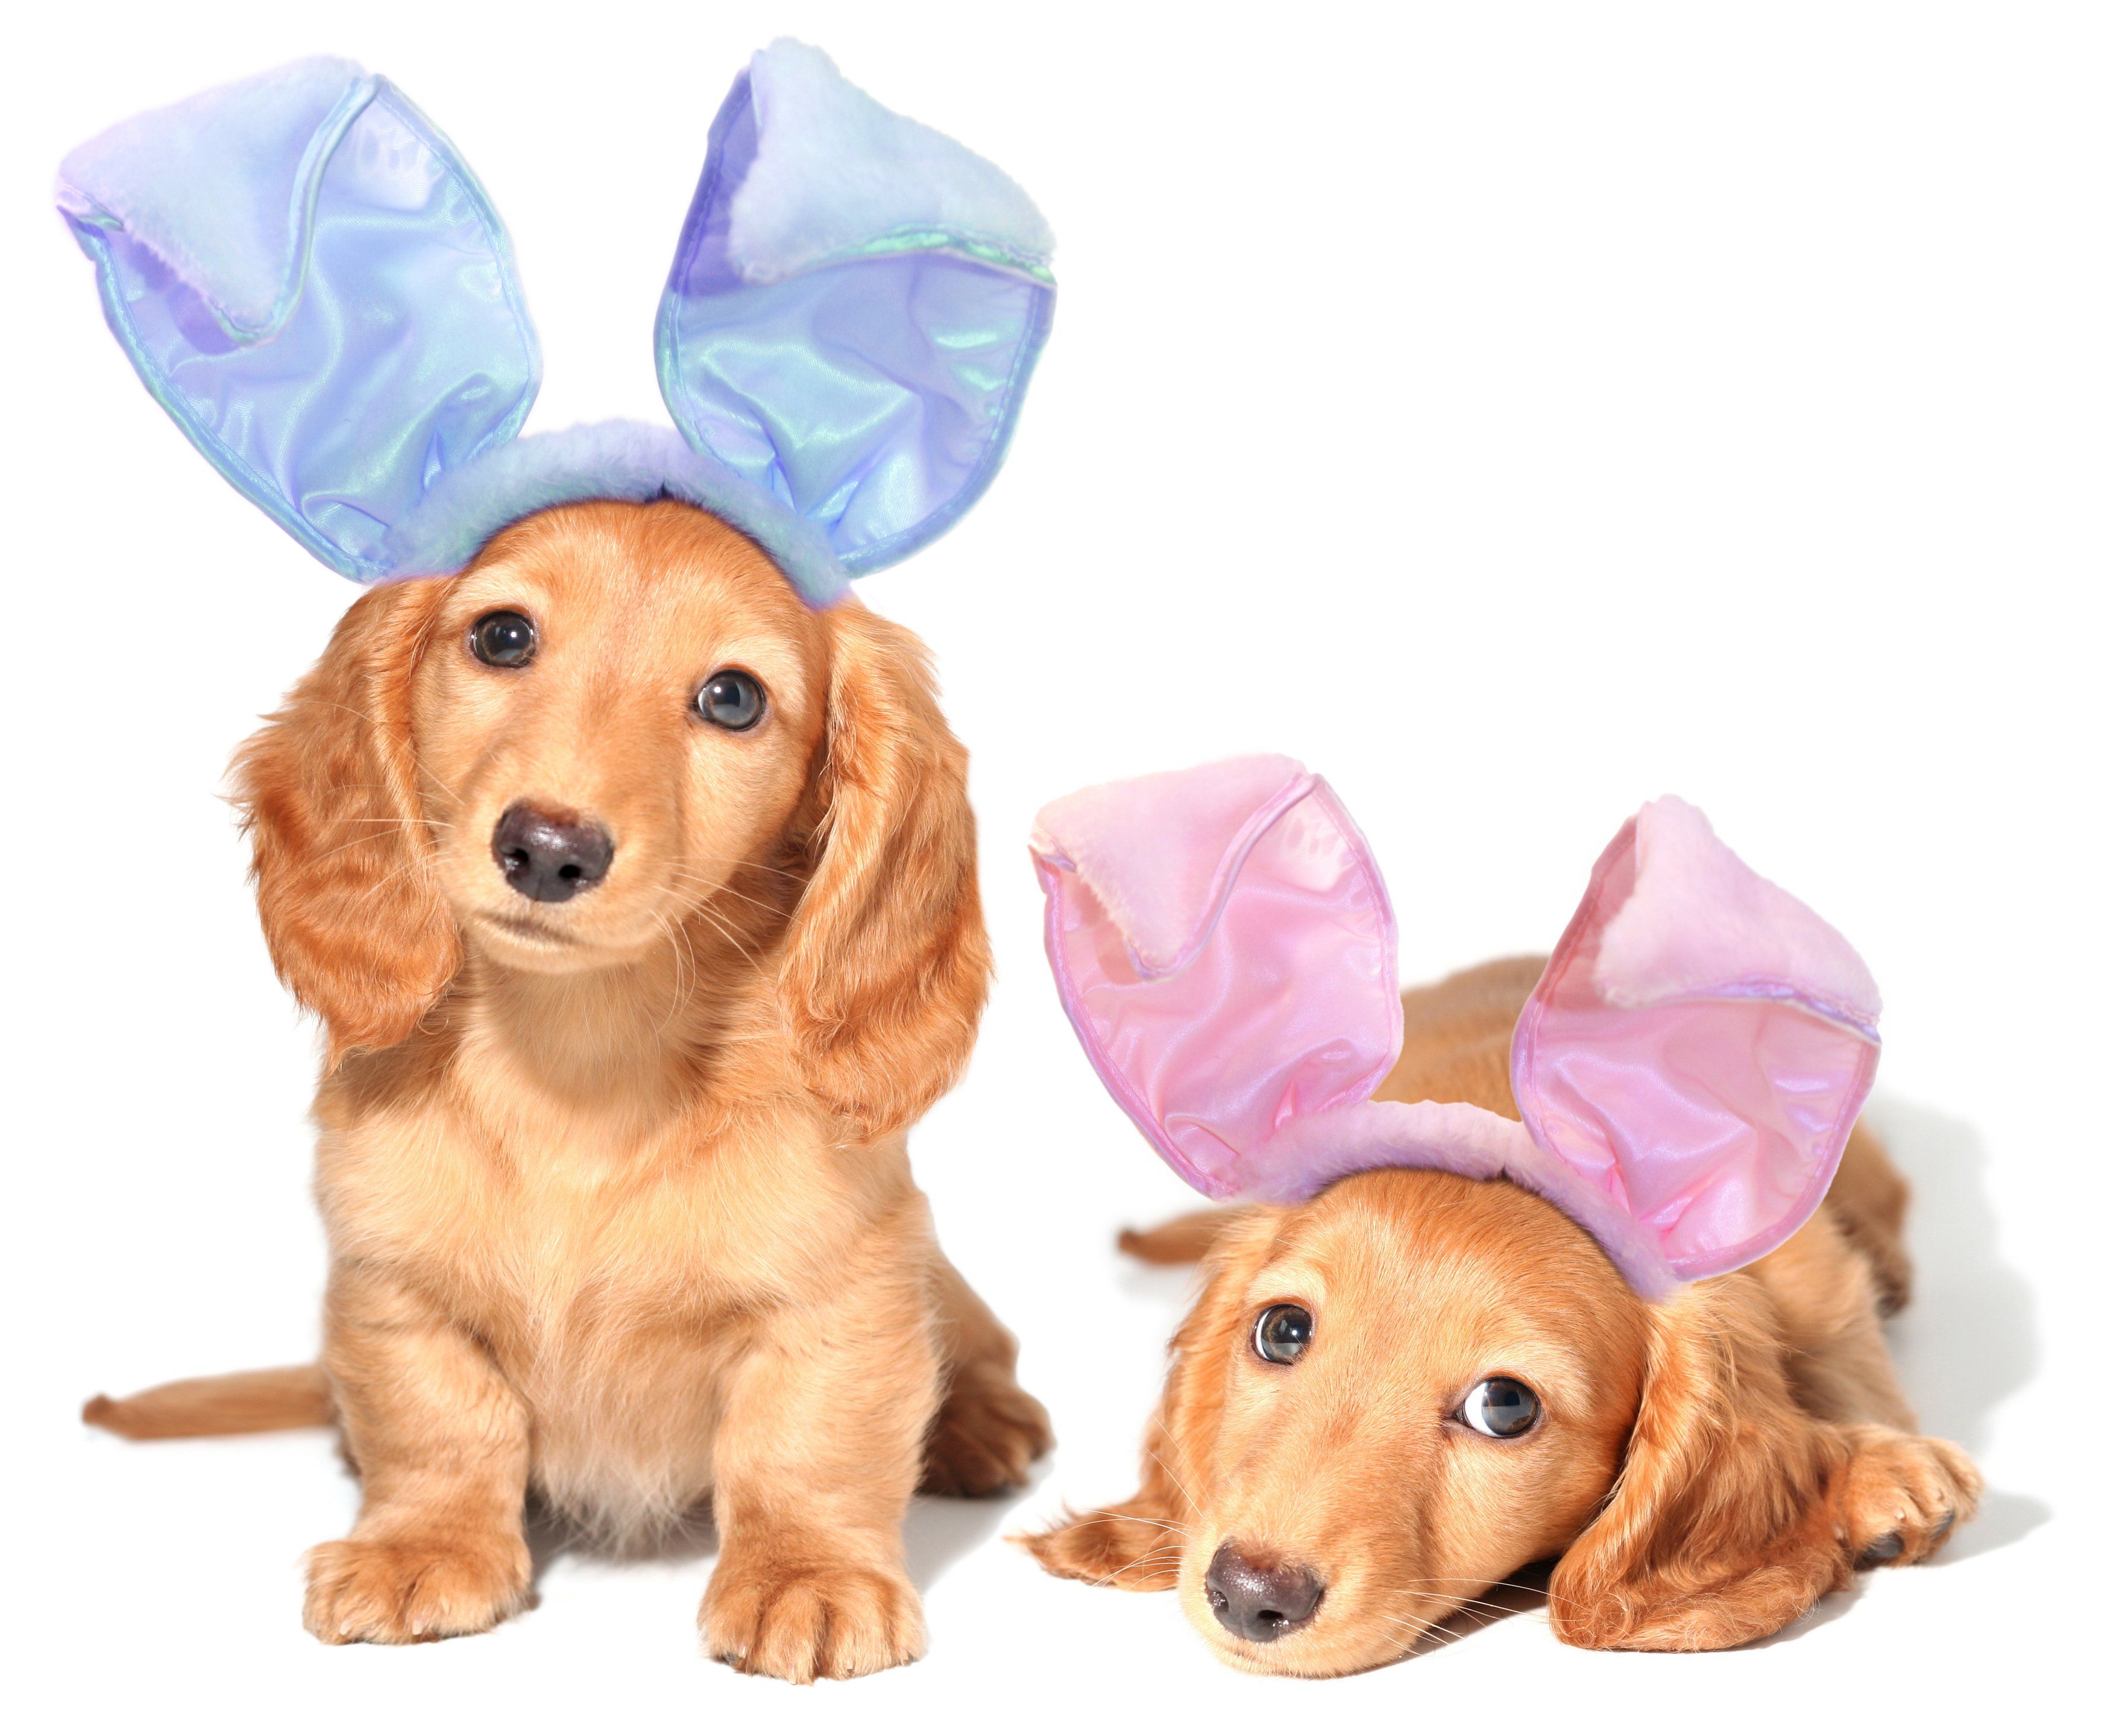 Dogs Who Are Posing For Their Easter Greeting Cards